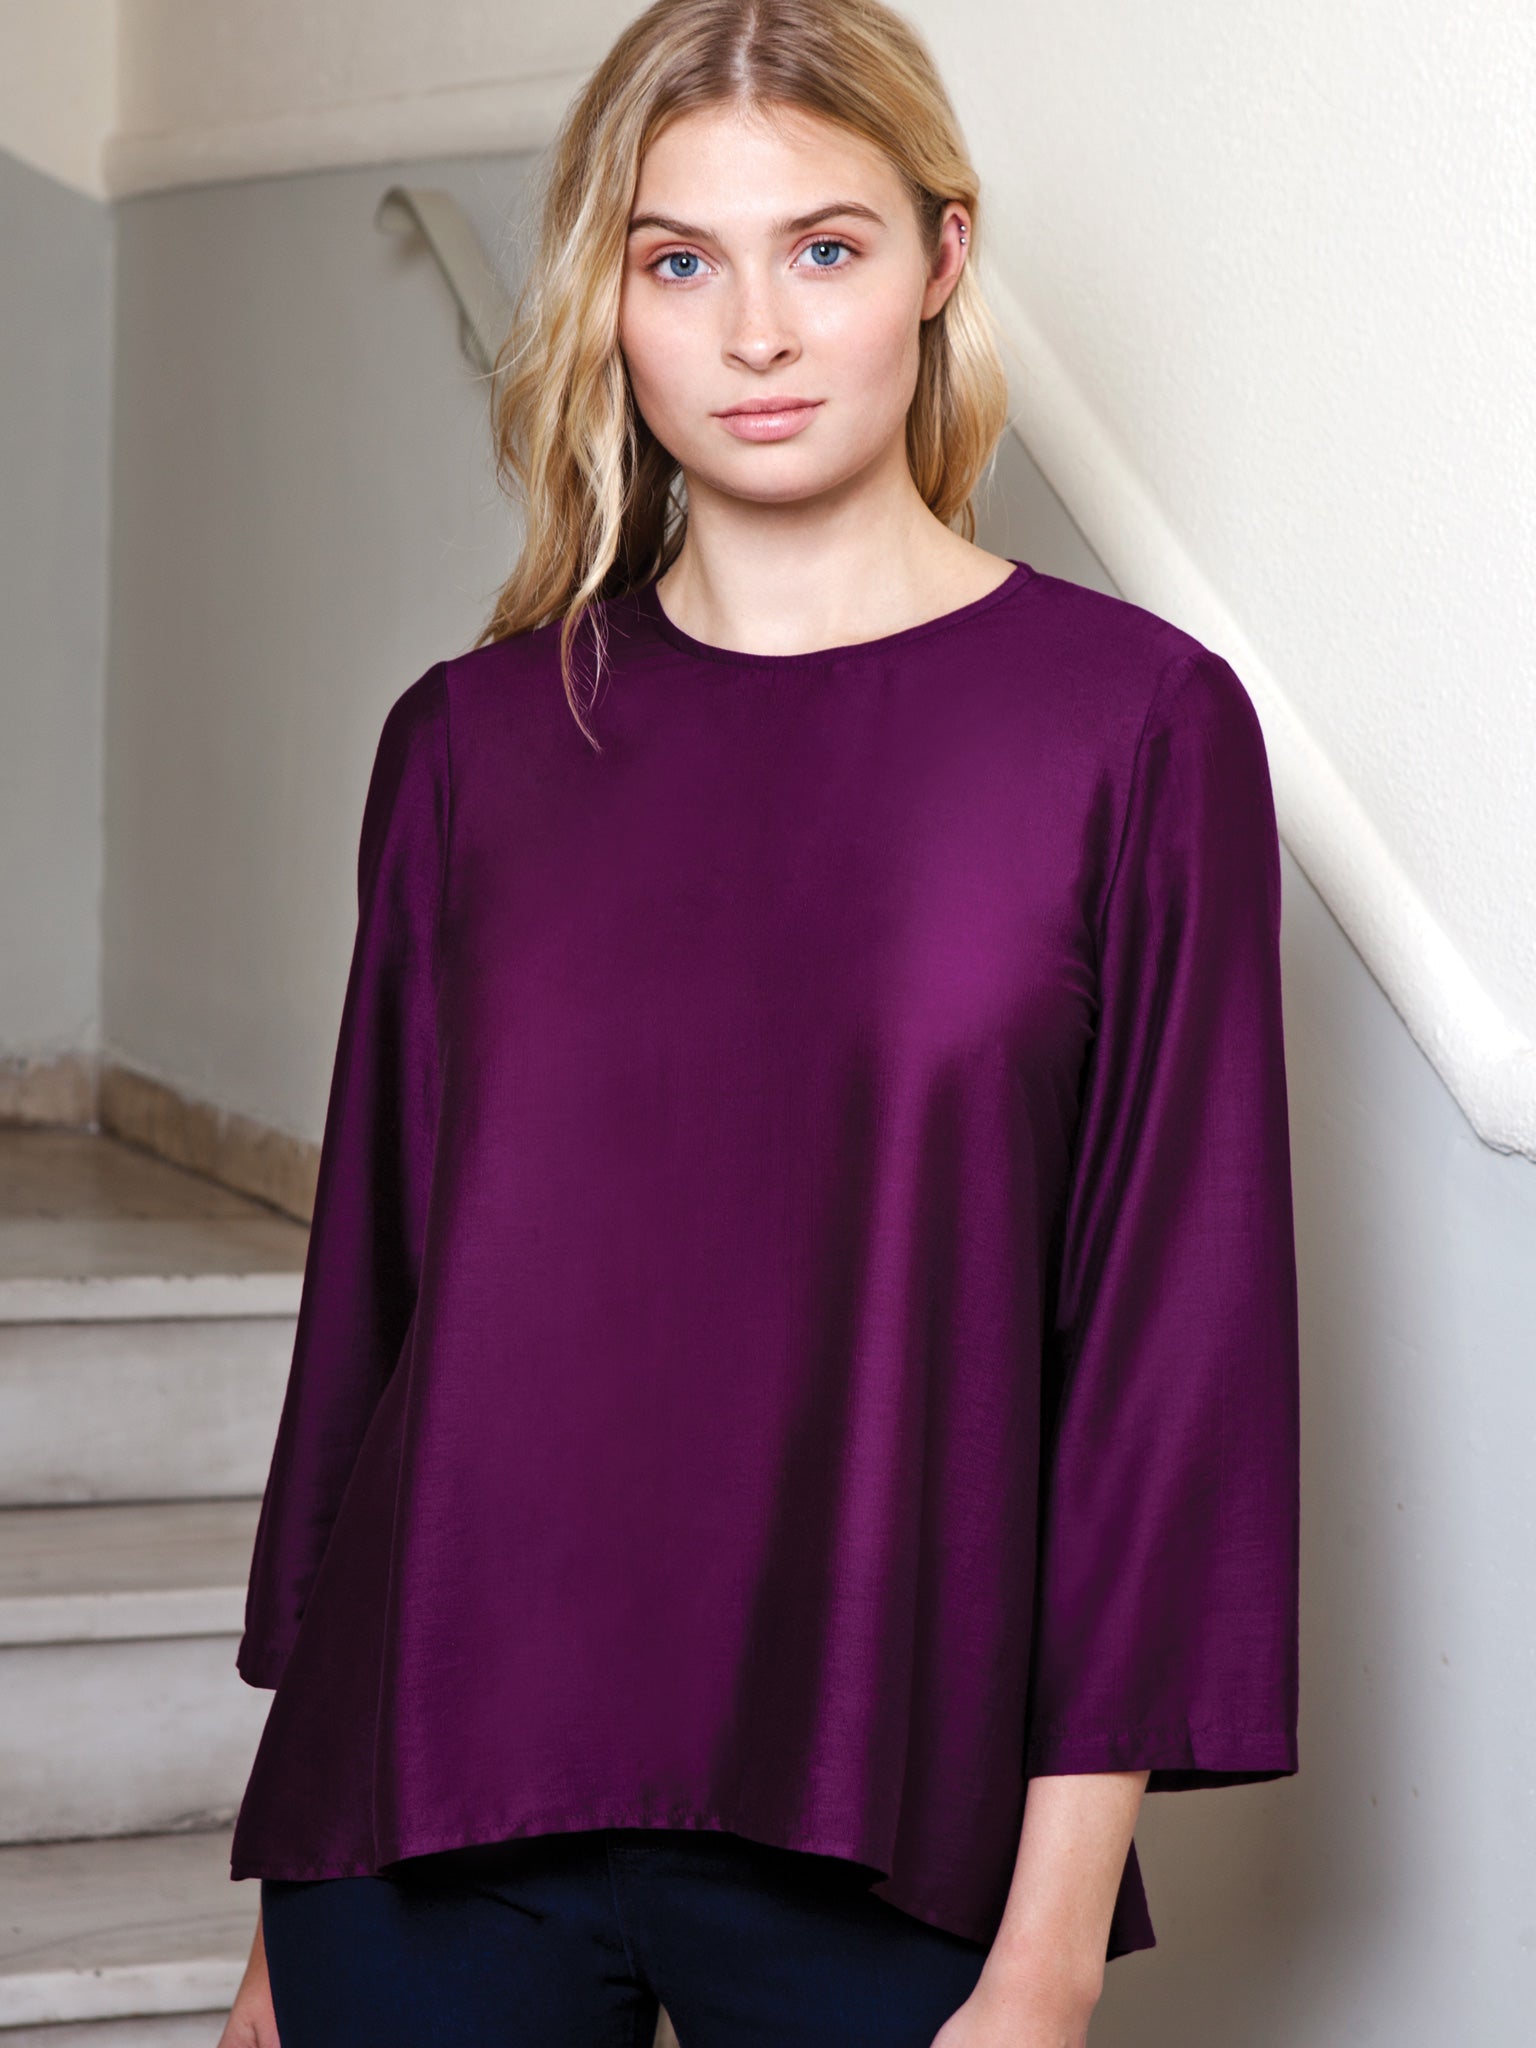 Always A Girl At Heart Violet Blouse